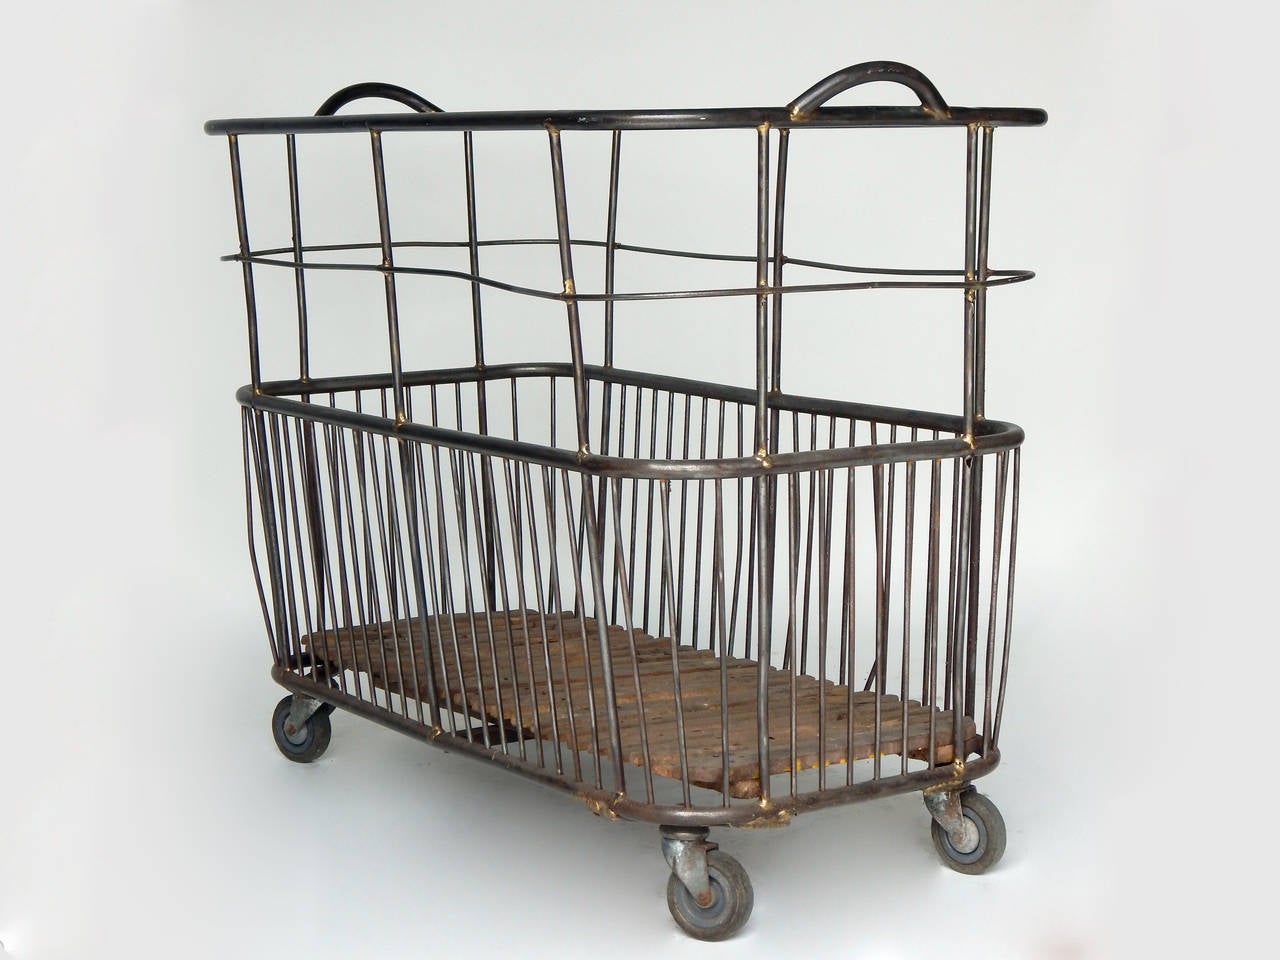 French steel baguette cart on wheels. Great for firewood, towels and toys etc.